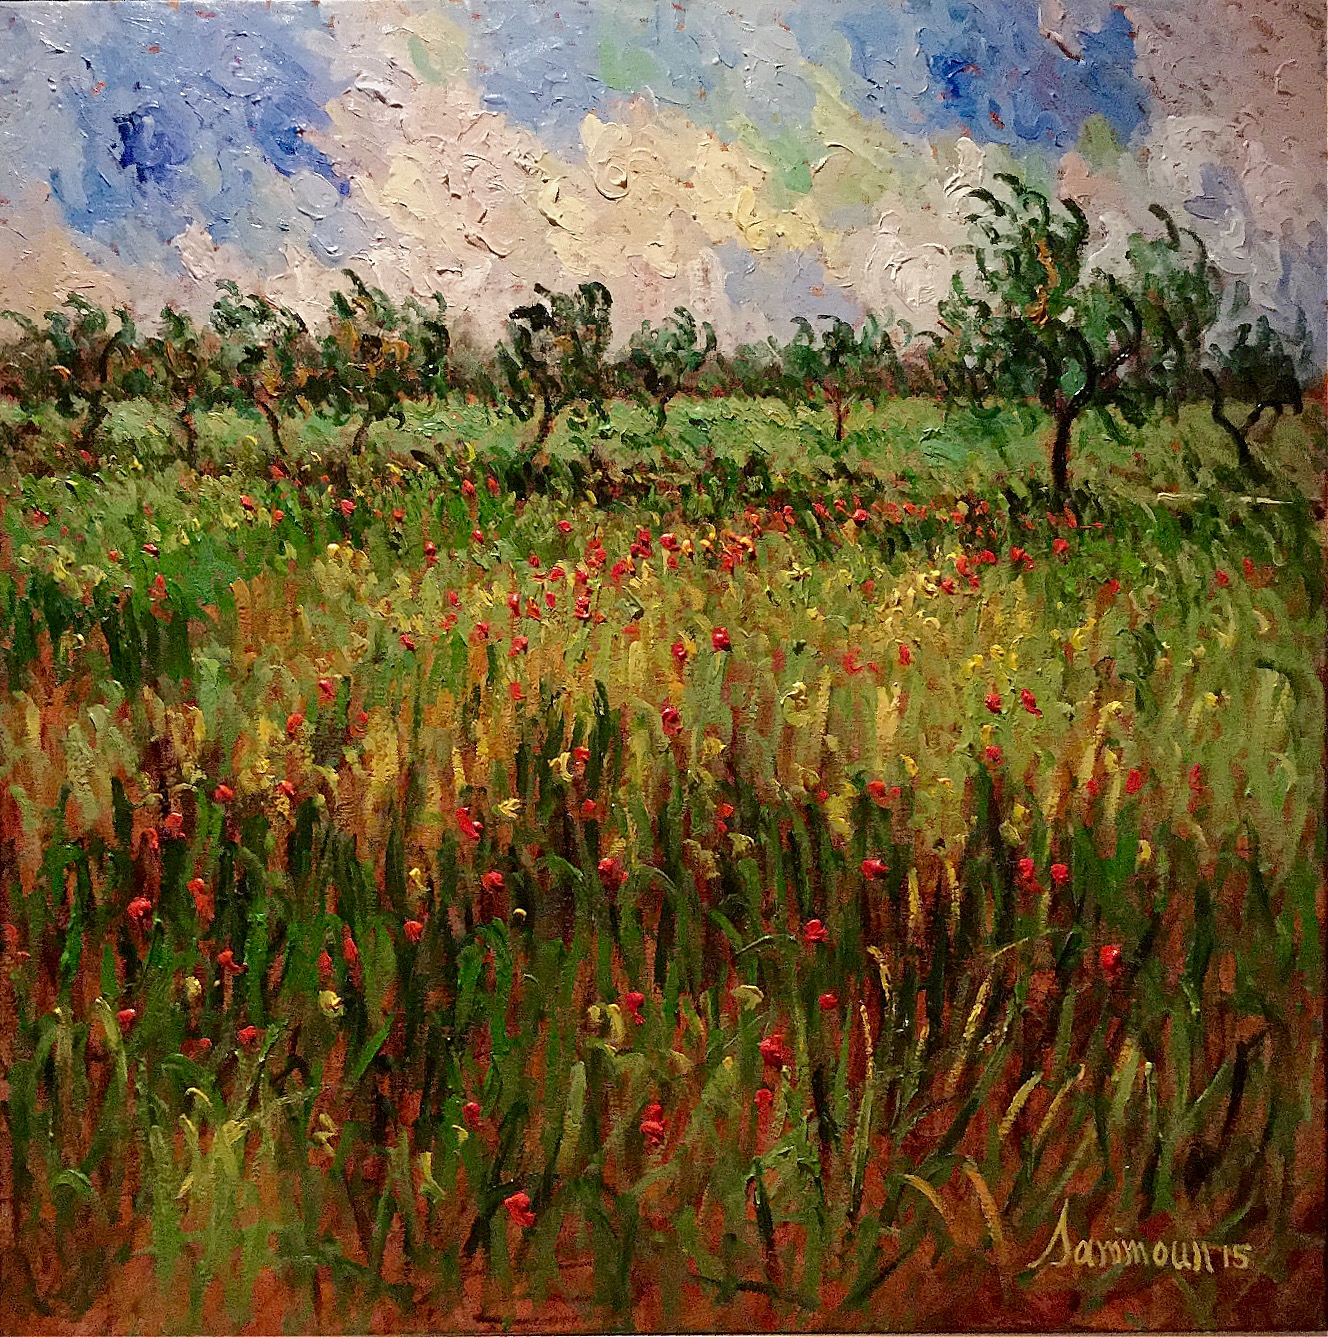 SAMIR SAMMOUN - Young Olive Trees and Poppies - Oil on Canvas - 40x40 inches